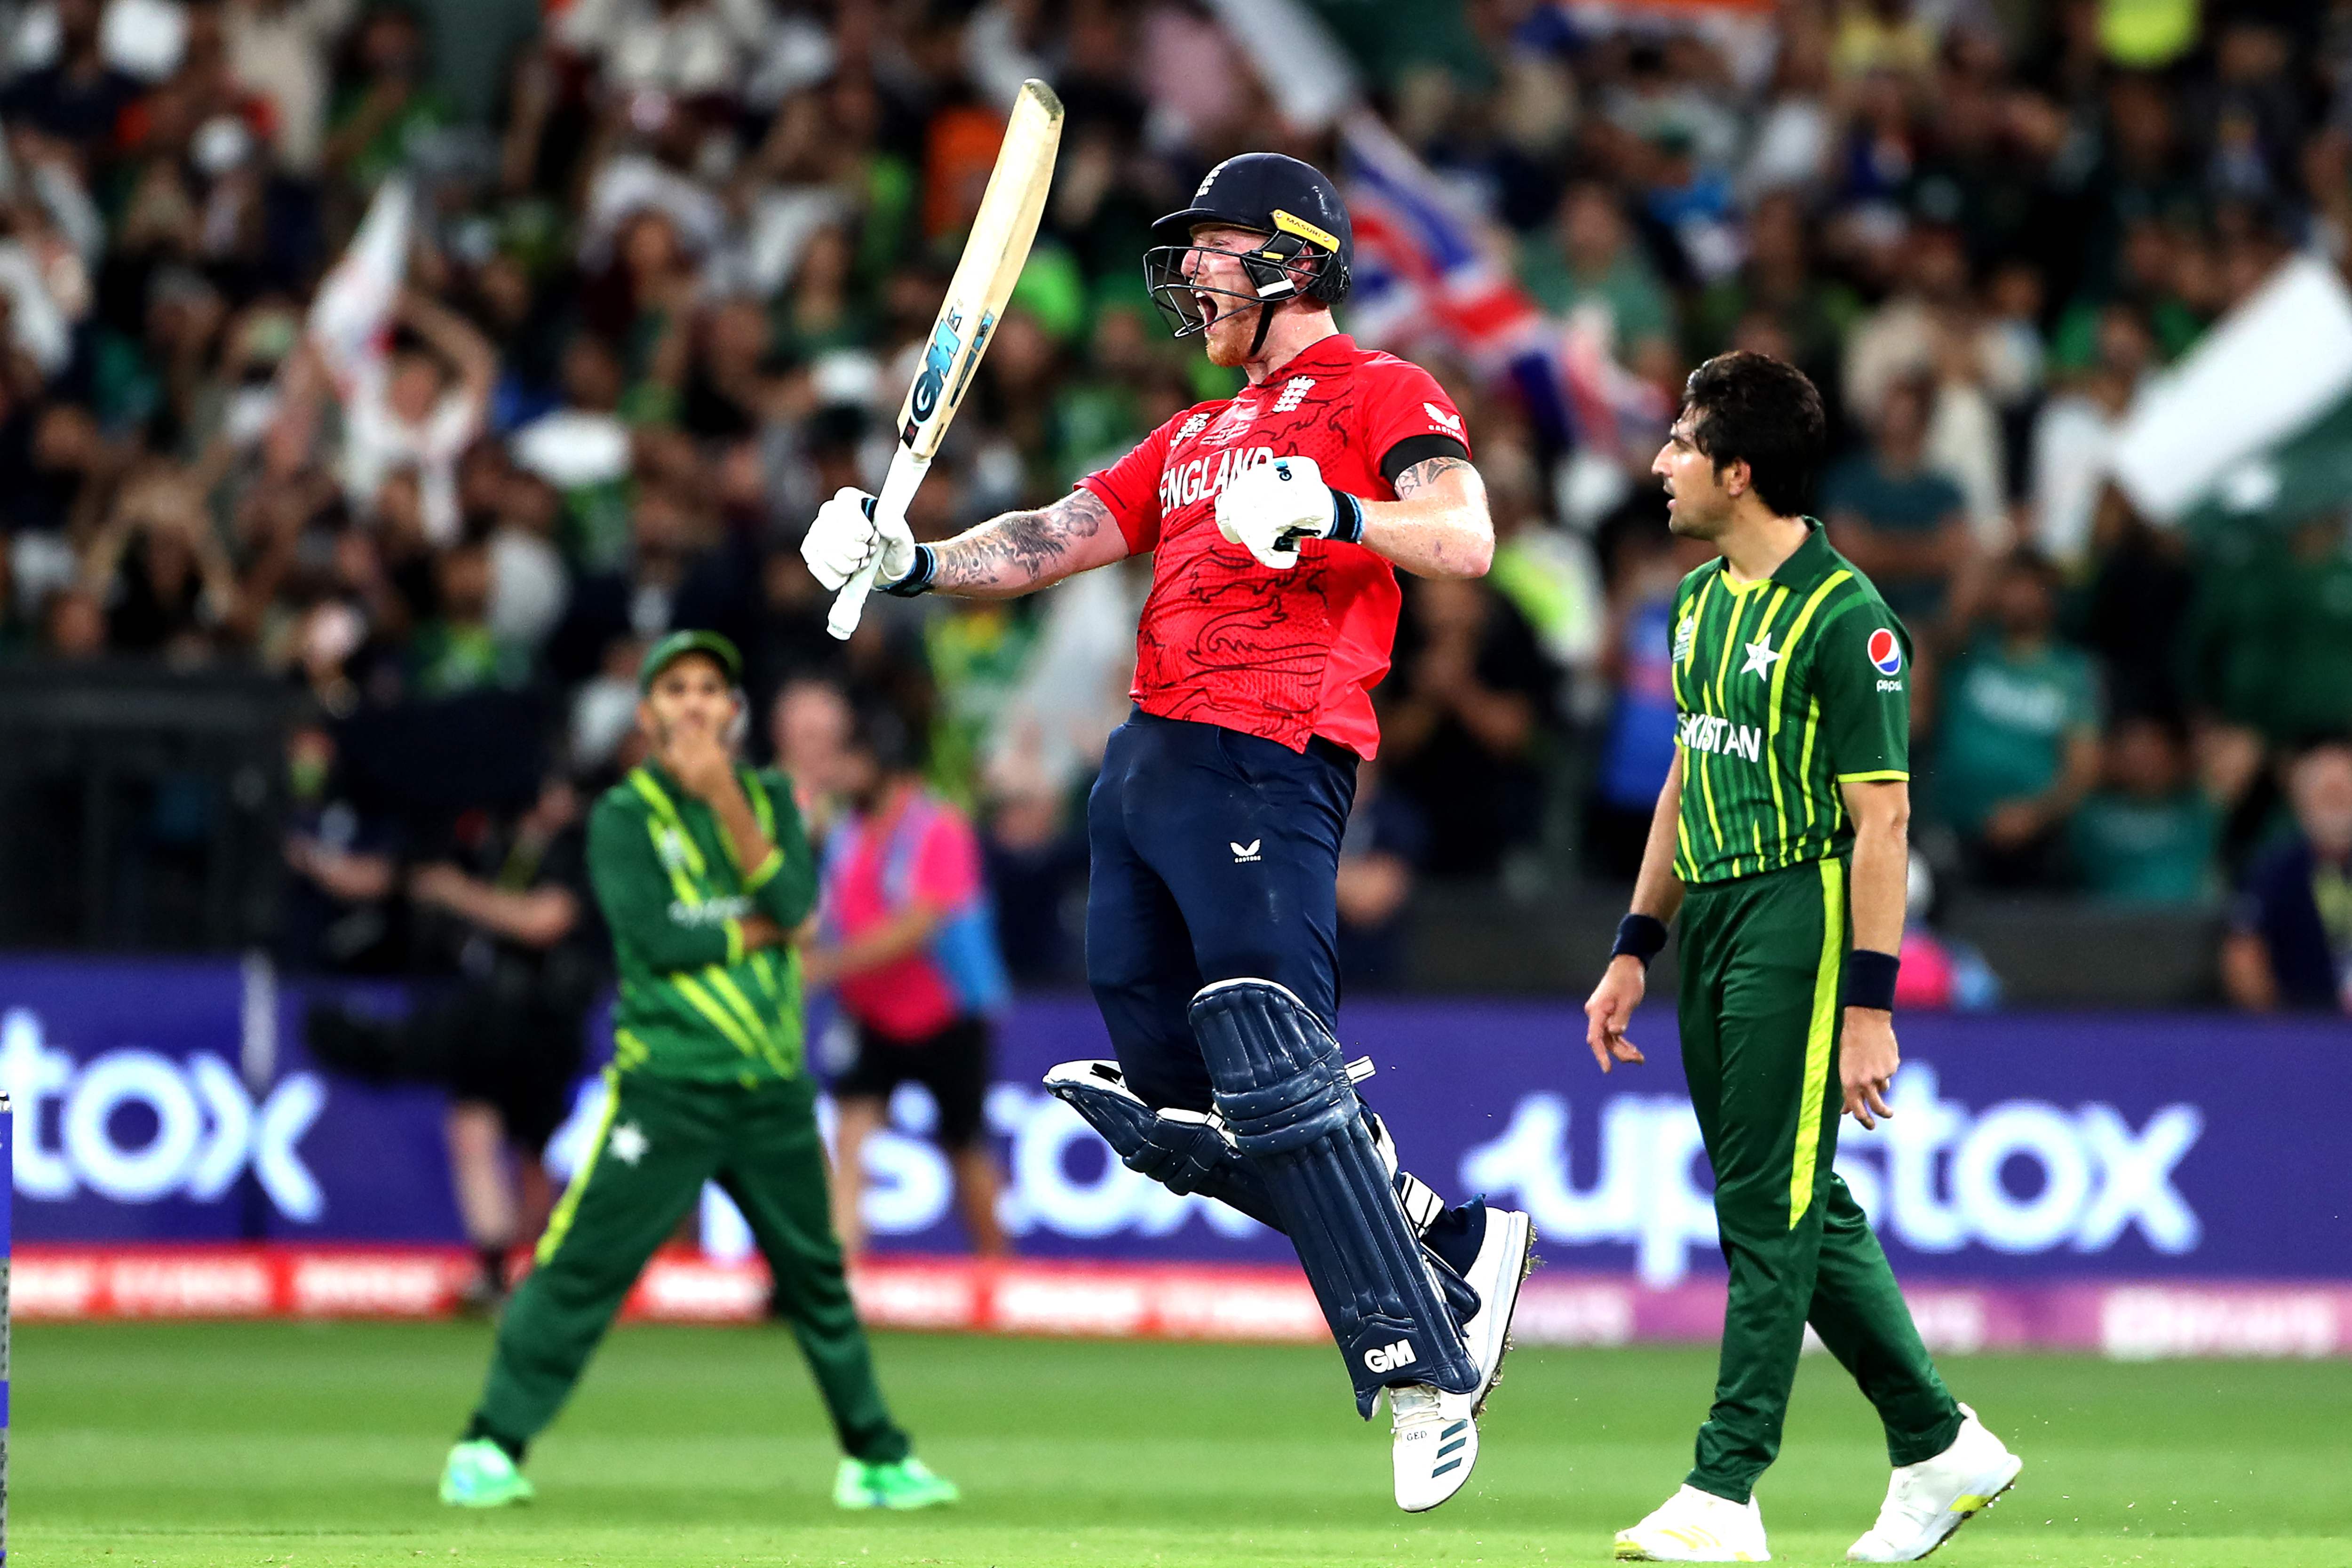 England defeated Pakistan in the previous T20 World Cup final and are hoping to regain their title.